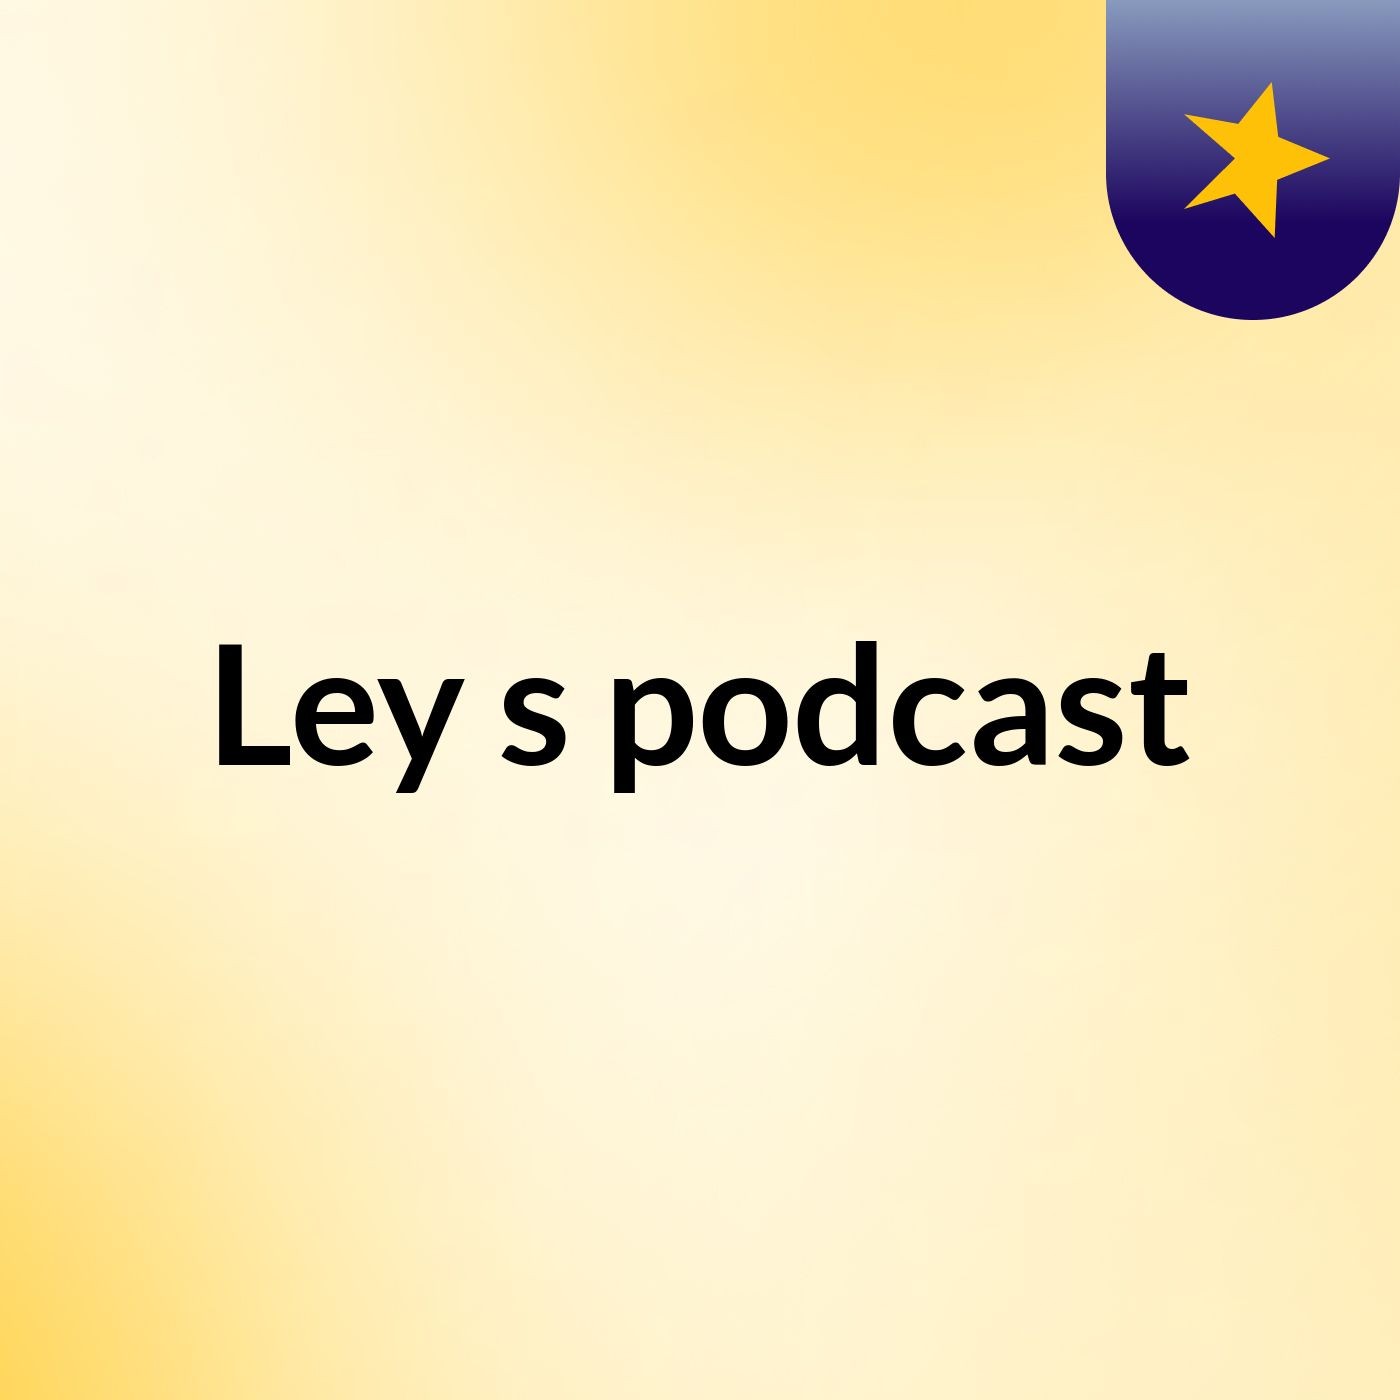 Episode 2 - Ley's podcast